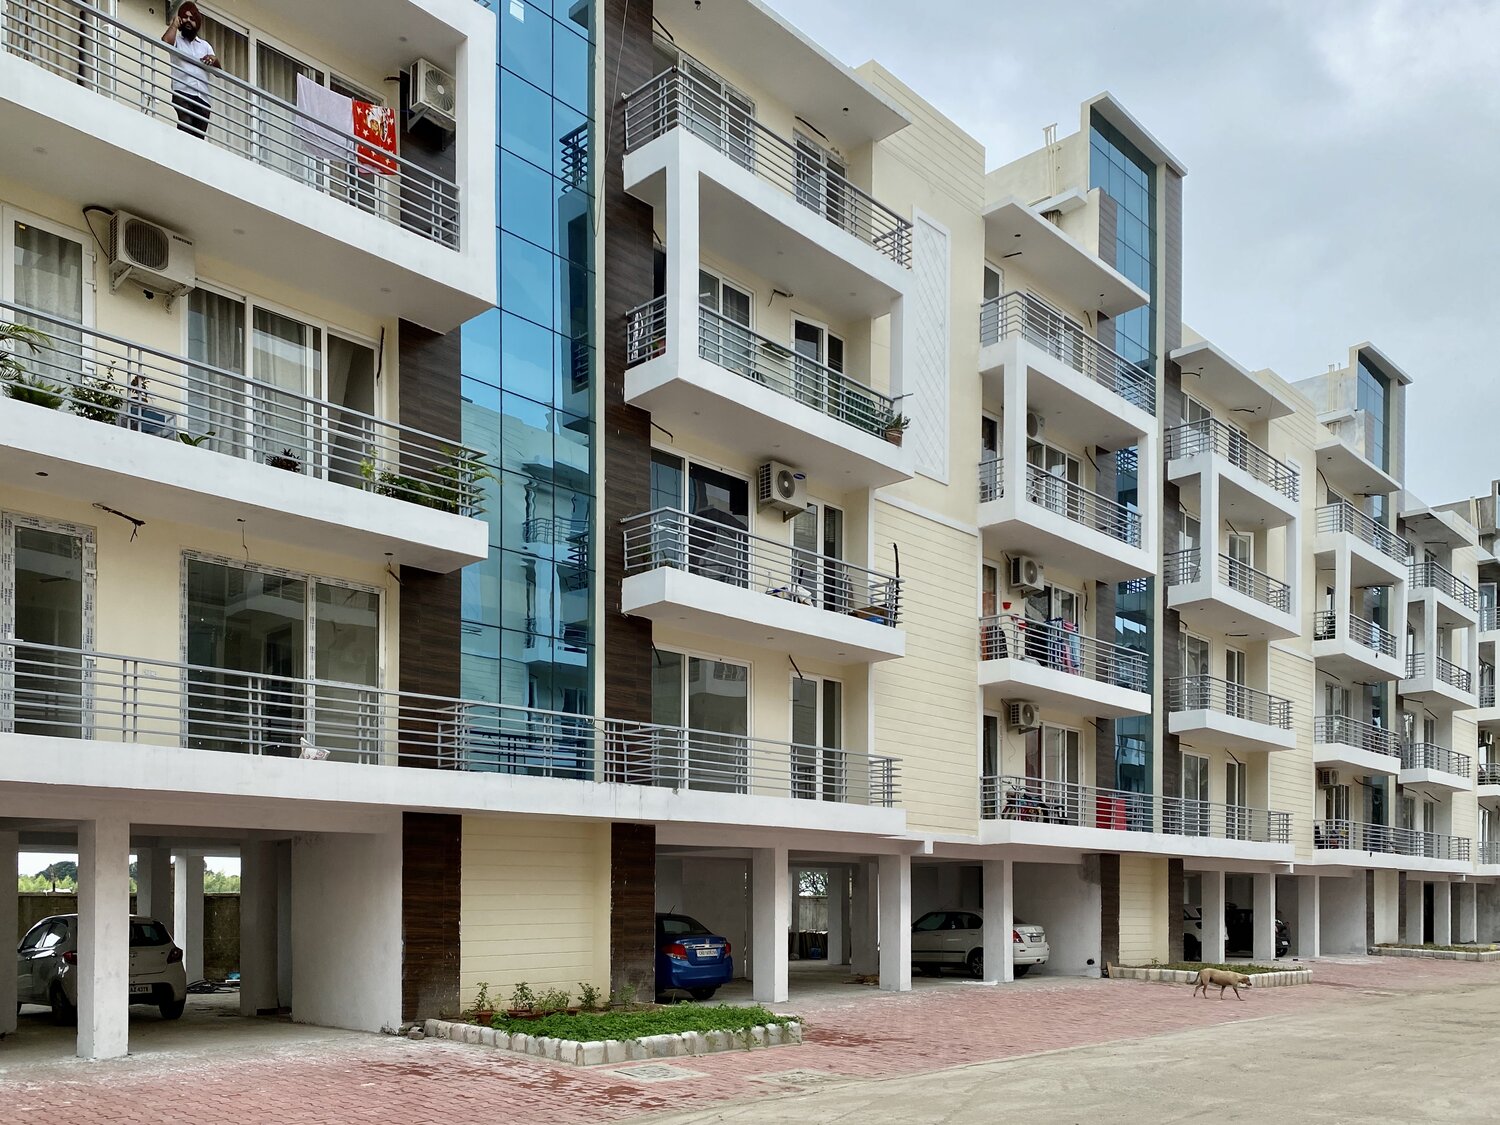 3 BHK Home for sale in Mohali